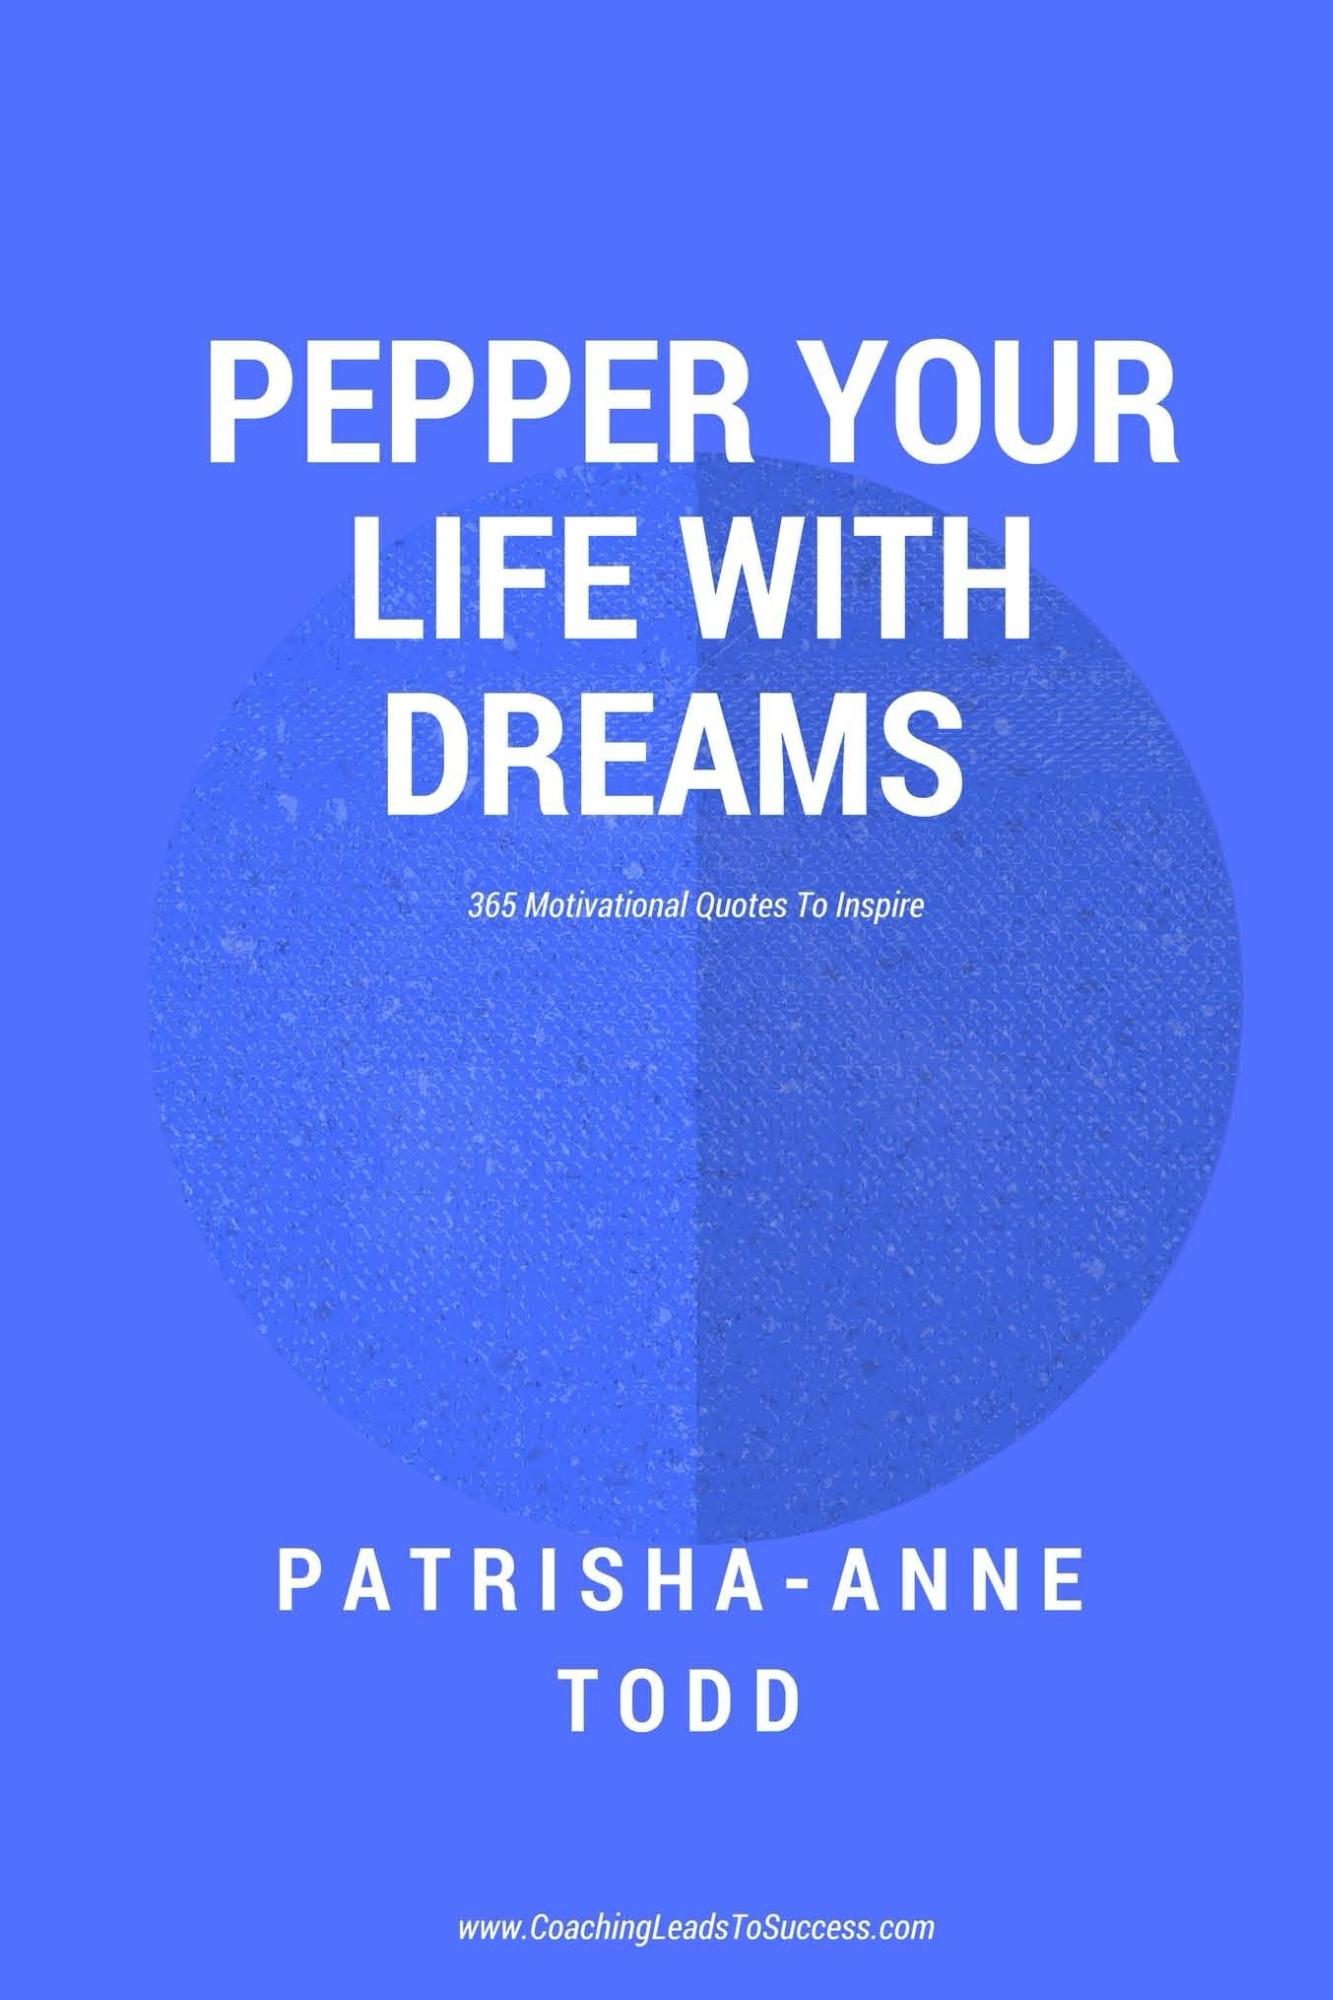 Pepper Your Life With Dreams is just one of the motivational tools master VIP coach PaTrisha-Anne Todd has created towards your lifestyle by design.